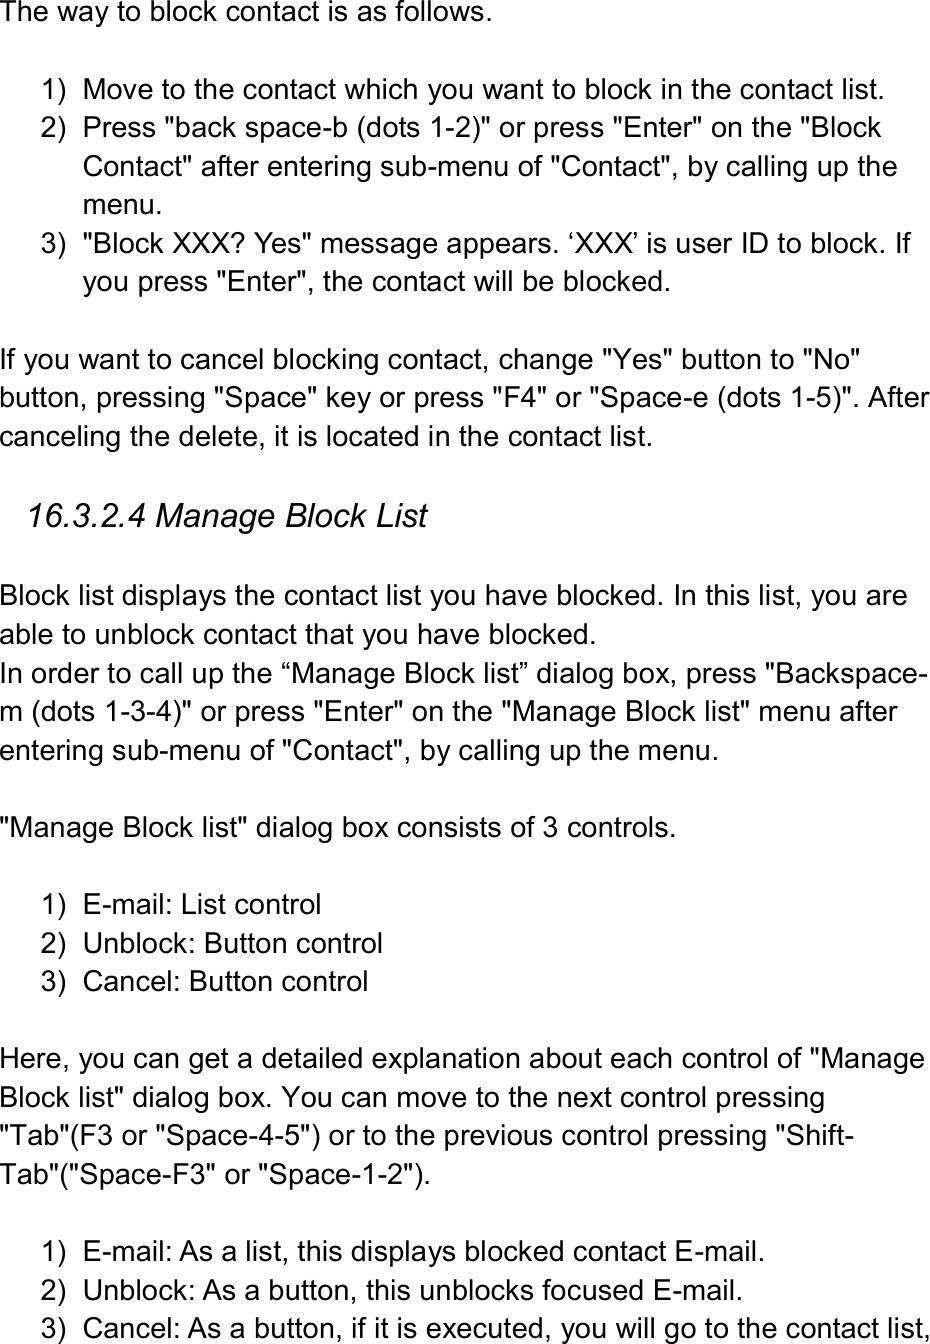   The way to block contact is as follows.    1)  Move to the contact which you want to block in the contact list.   2)  Press &quot;back space-b (dots 1-2)&quot; or press &quot;Enter&quot; on the &quot;Block Contact&quot; after entering sub-menu of &quot;Contact&quot;, by calling up the menu.   3)  &quot;Block XXX? Yes&quot; message appears. ‘XXX’ is user ID to block. If you press &quot;Enter&quot;, the contact will be blocked.    If you want to cancel blocking contact, change &quot;Yes&quot; button to &quot;No&quot; button, pressing &quot;Space&quot; key or press &quot;F4&quot; or &quot;Space-e (dots 1-5)&quot;. After canceling the delete, it is located in the contact list.    16.3.2.4 Manage Block List  Block list displays the contact list you have blocked. In this list, you are able to unblock contact that you have blocked. In order to call up the “Manage Block list” dialog box, press &quot;Backspace-m (dots 1-3-4)&quot; or press &quot;Enter&quot; on the &quot;Manage Block list&quot; menu after entering sub-menu of &quot;Contact&quot;, by calling up the menu.    &quot;Manage Block list&quot; dialog box consists of 3 controls.    1)  E-mail: List control 2)  Unblock: Button control 3)  Cancel: Button control  Here, you can get a detailed explanation about each control of &quot;Manage Block list&quot; dialog box. You can move to the next control pressing &quot;Tab&quot;(F3 or &quot;Space-4-5&quot;) or to the previous control pressing &quot;Shift-Tab&quot;(&quot;Space-F3&quot; or &quot;Space-1-2&quot;).    1)  E-mail: As a list, this displays blocked contact E-mail.   2)  Unblock: As a button, this unblocks focused E-mail.   3)  Cancel: As a button, if it is executed, you will go to the contact list, 